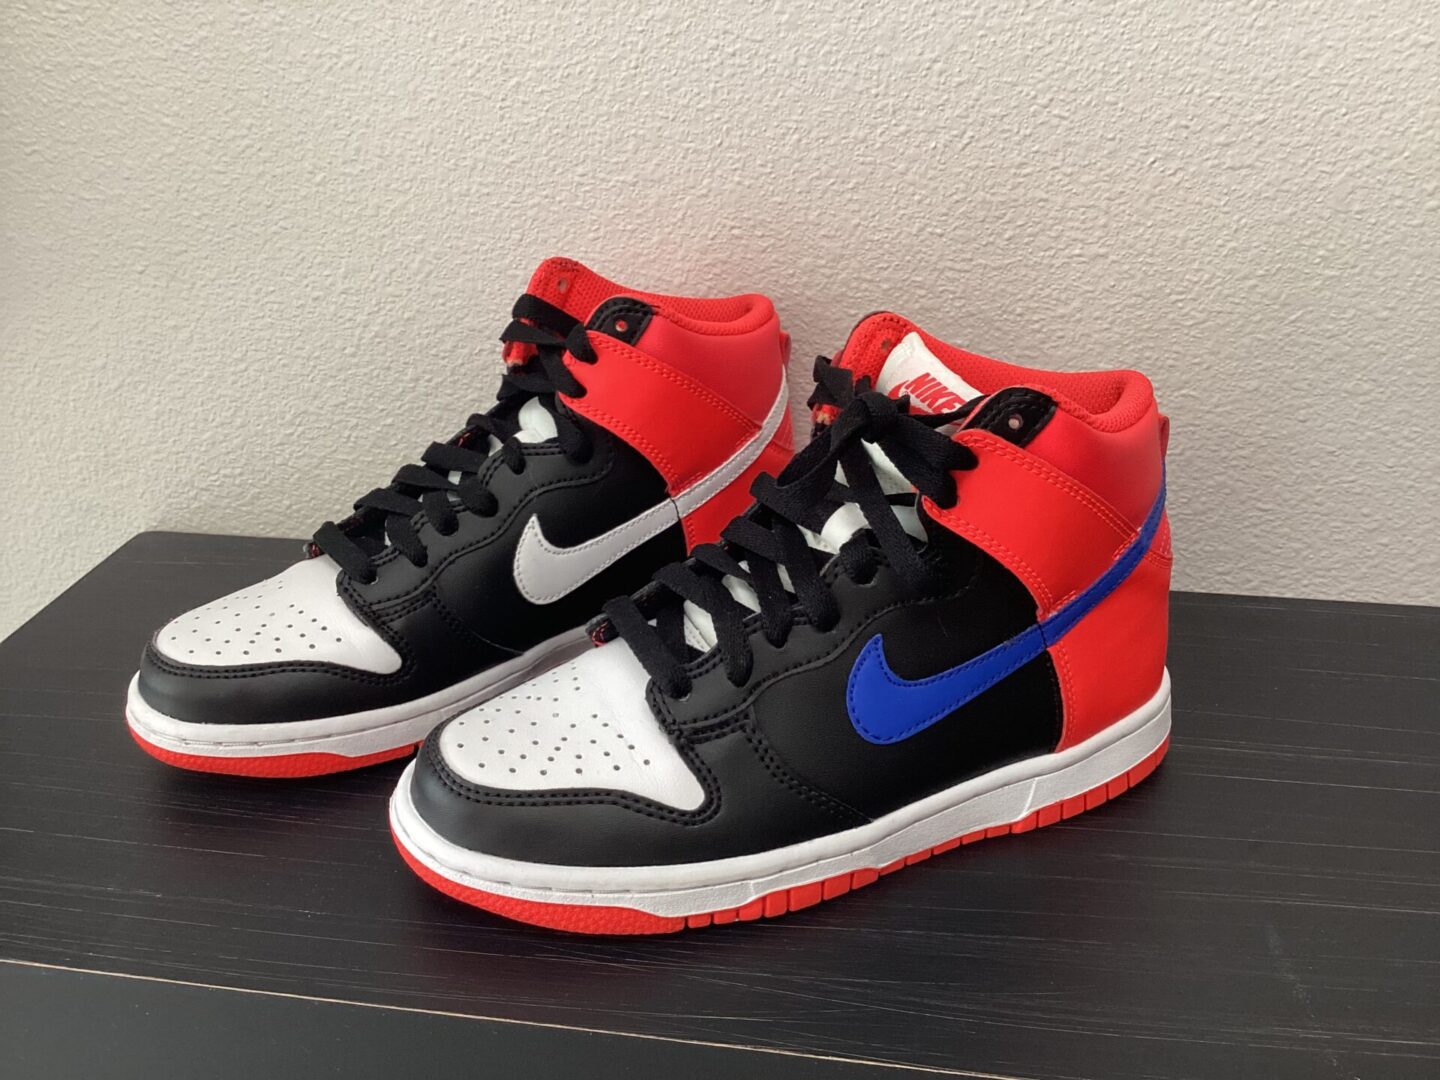 A pair of pre owned Dunk High Tops sneakers with black, red, and white colors and blue accents, displayed on a dark shelf against a gray background.